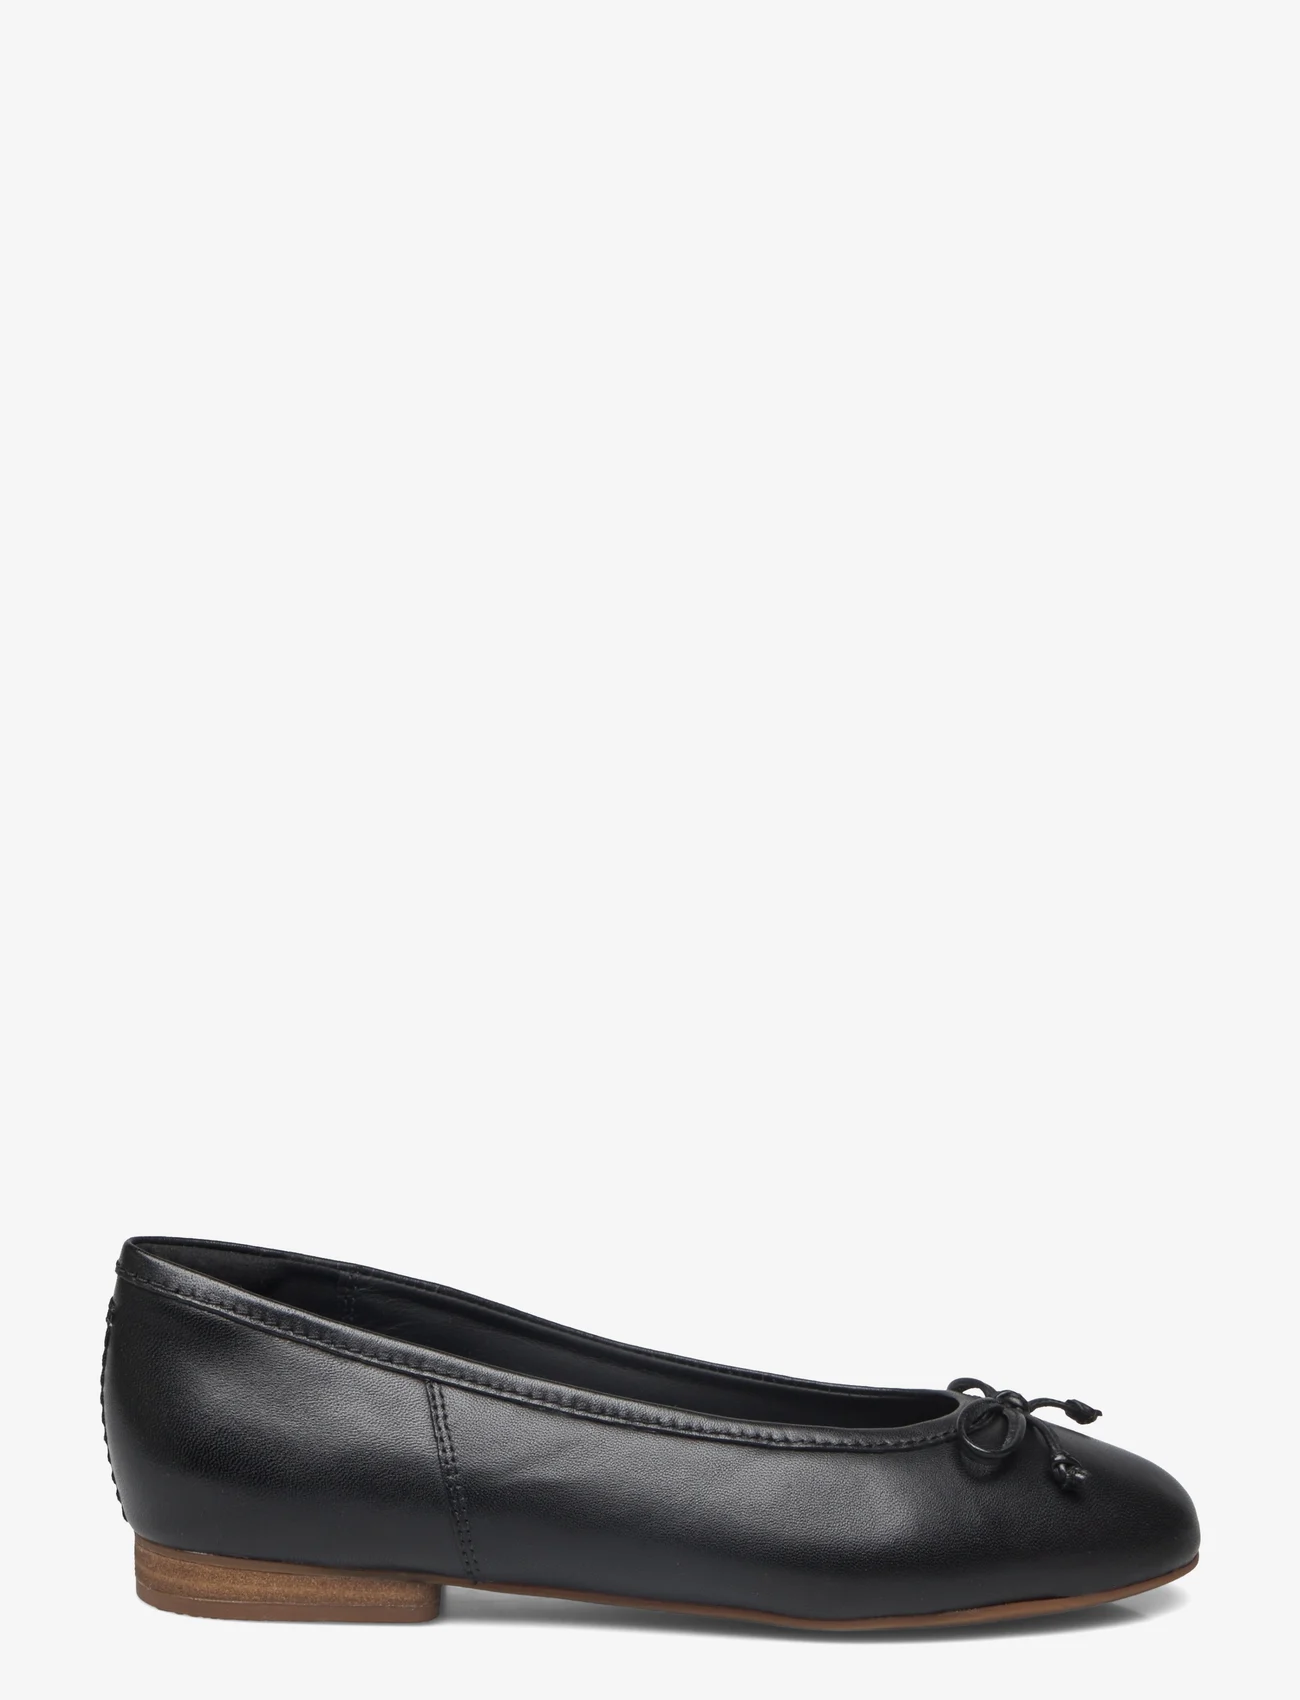 Clarks - Fawna Lily D - juhlamuotia outlet-hintaan - 1216 black leather - 1